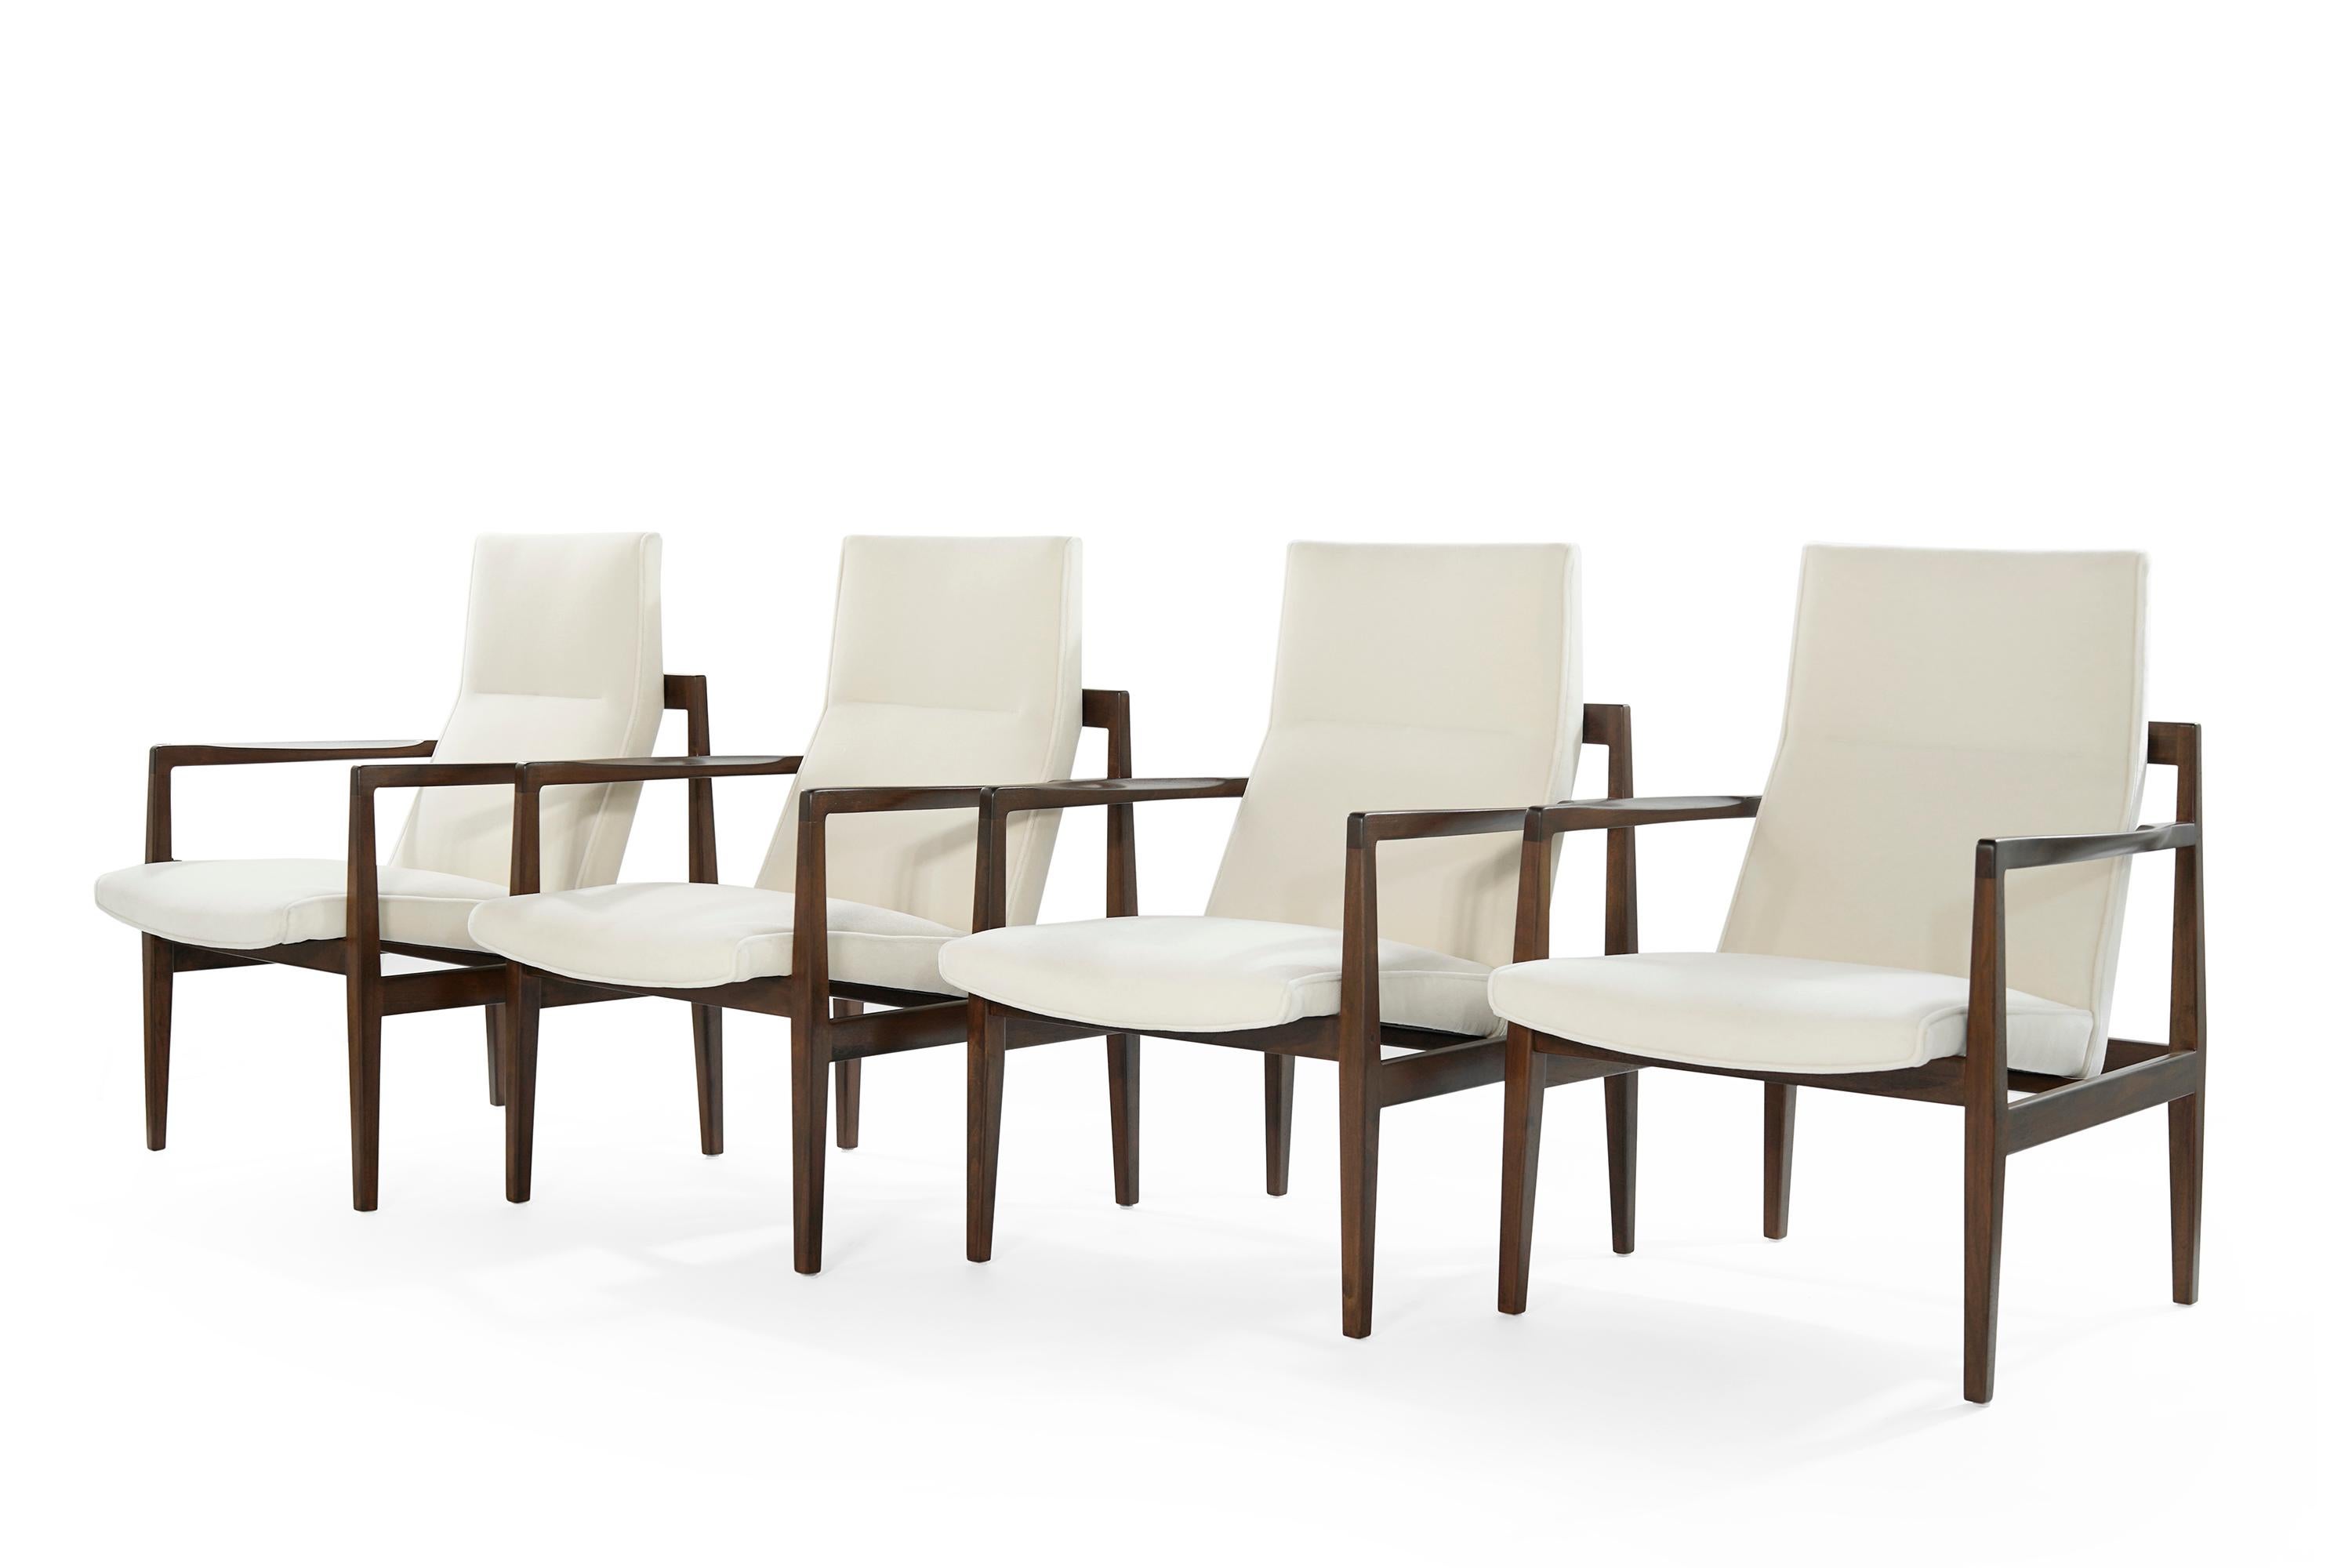 A set of four high-back lounge chairs designed by Jens Risom, featuring fully restored open-arm walnut frames, boasting clean, elegant lines from all angles. Newly upholstered in mohair by Holly Hunt. Priced as a set of four but also available in